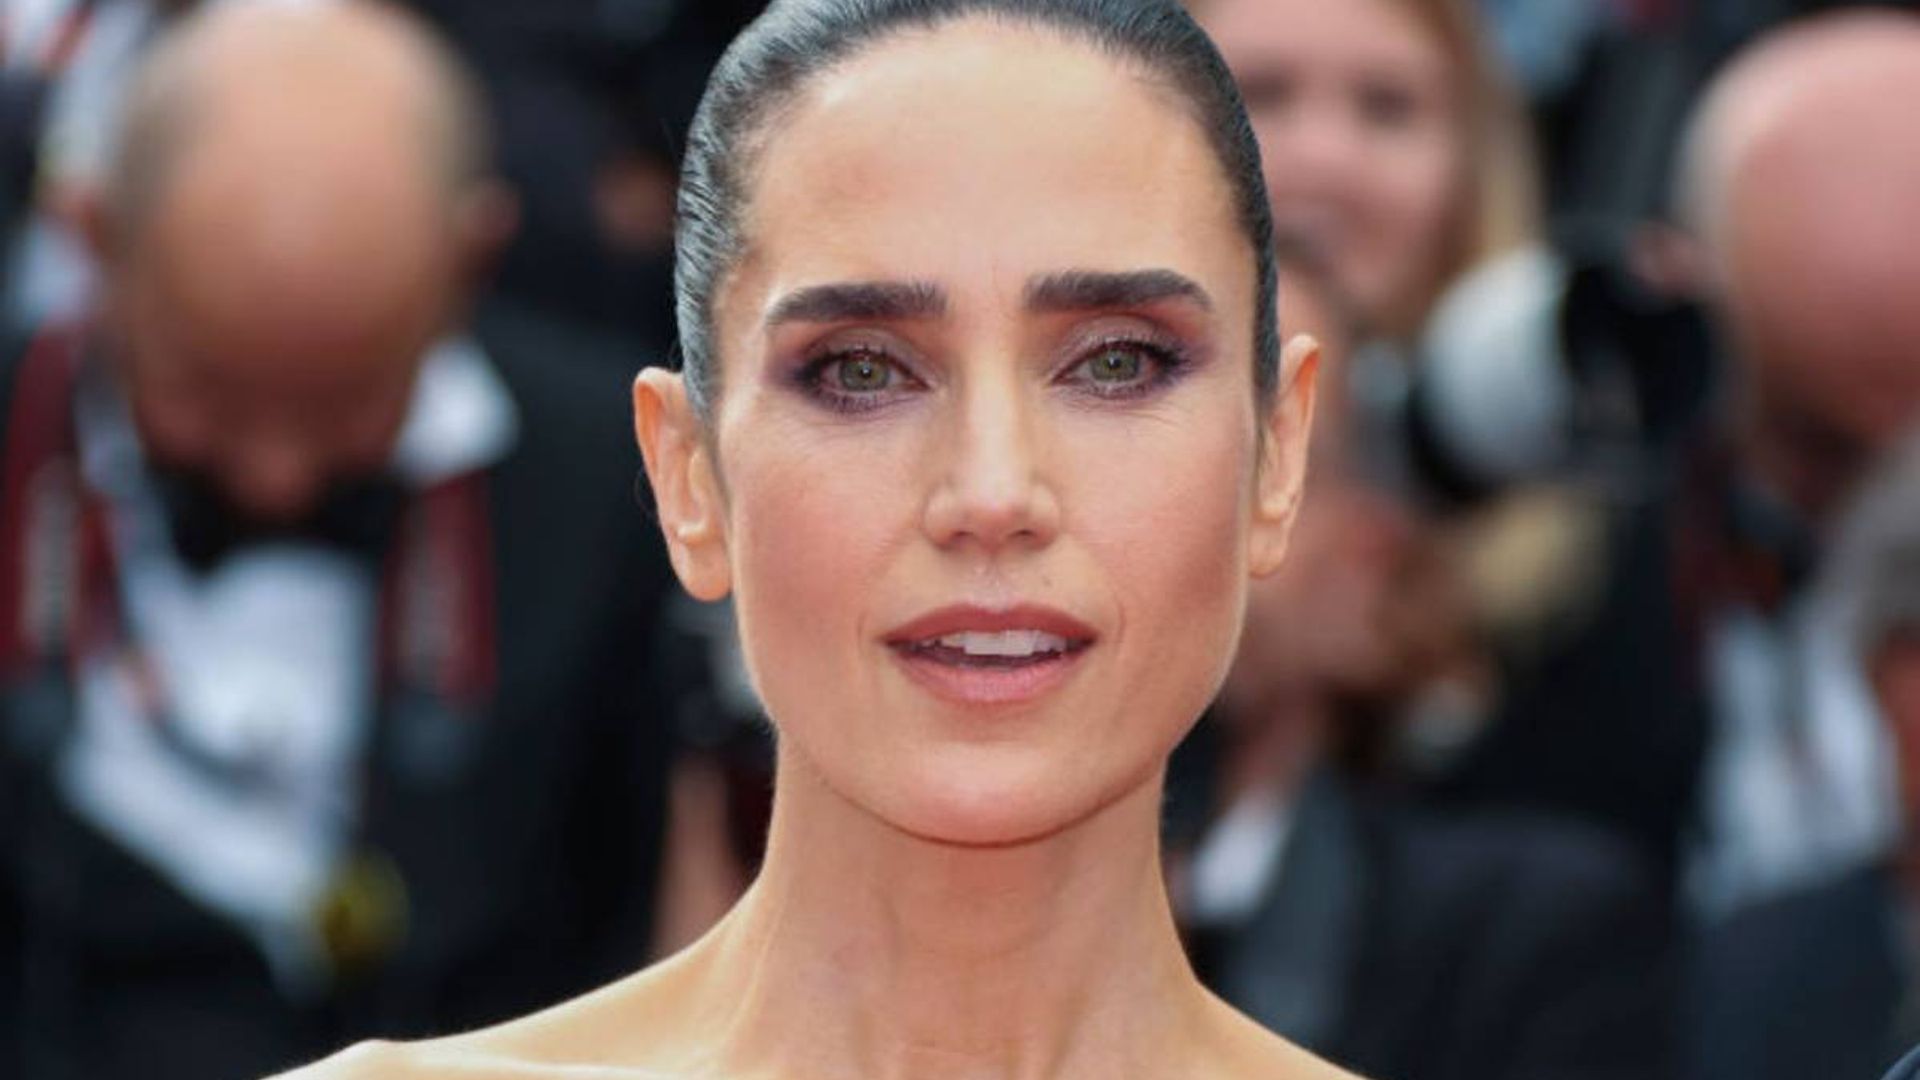 Top Gun's Jennifer Connelly wows with flirty fashion statement - and you  should see her boots!